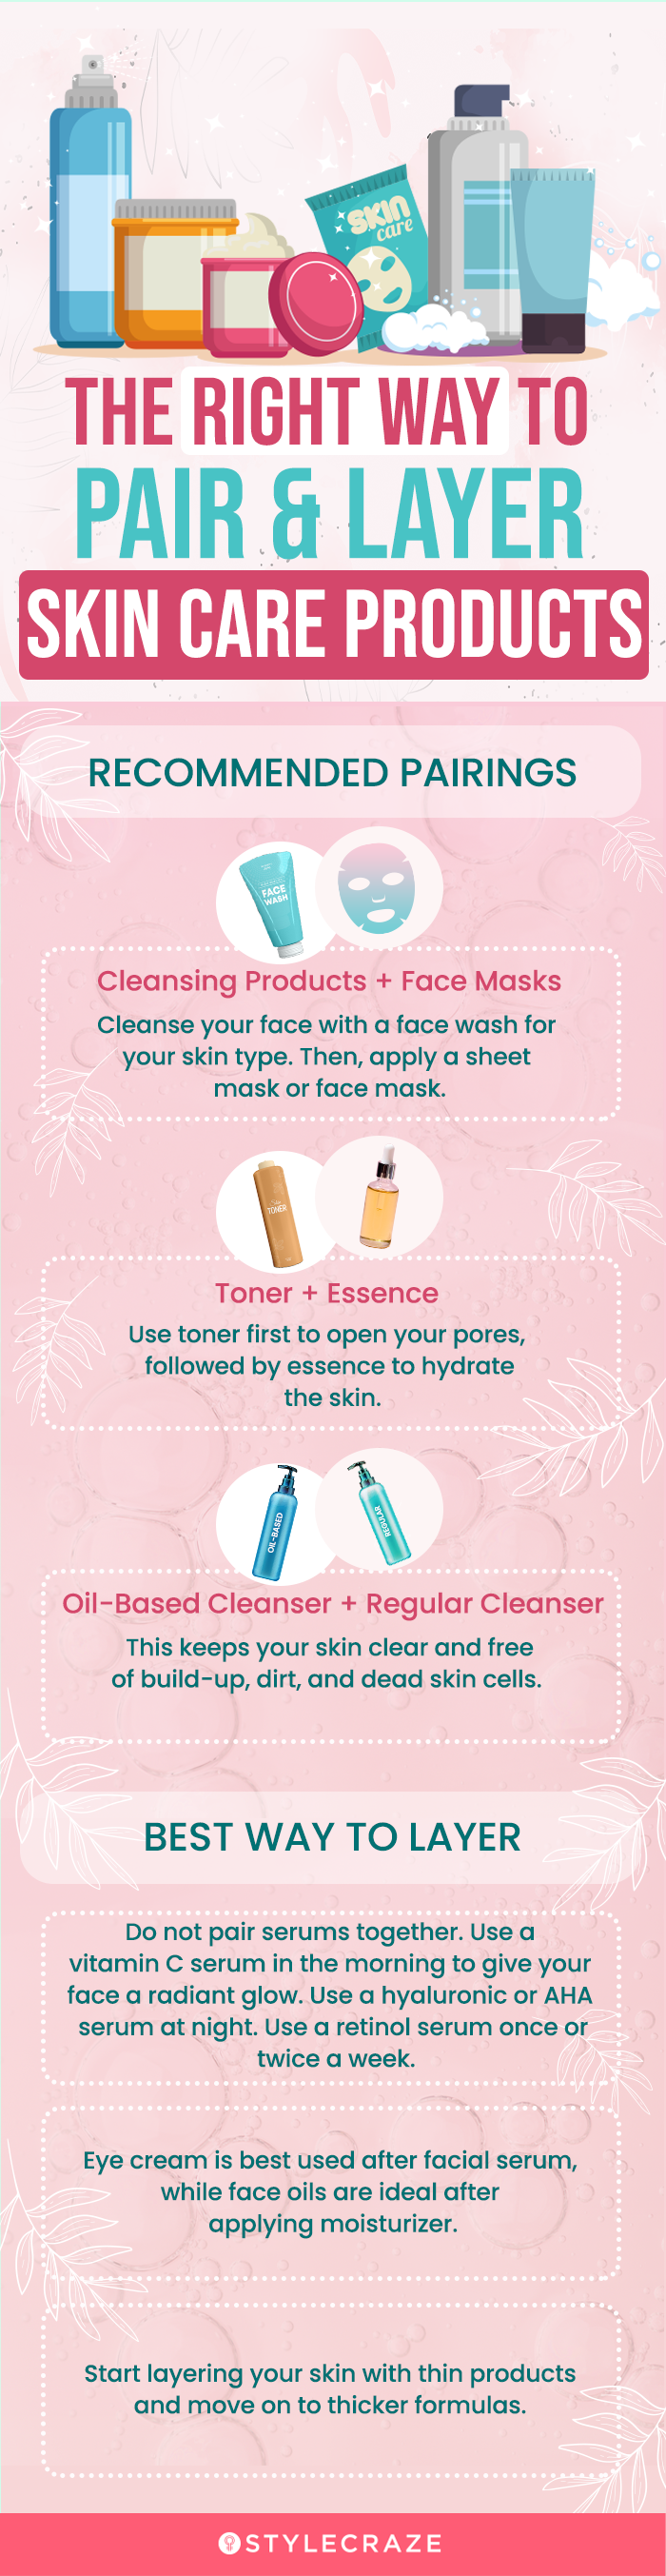 the right way to pair & layer skin care products [infographic]